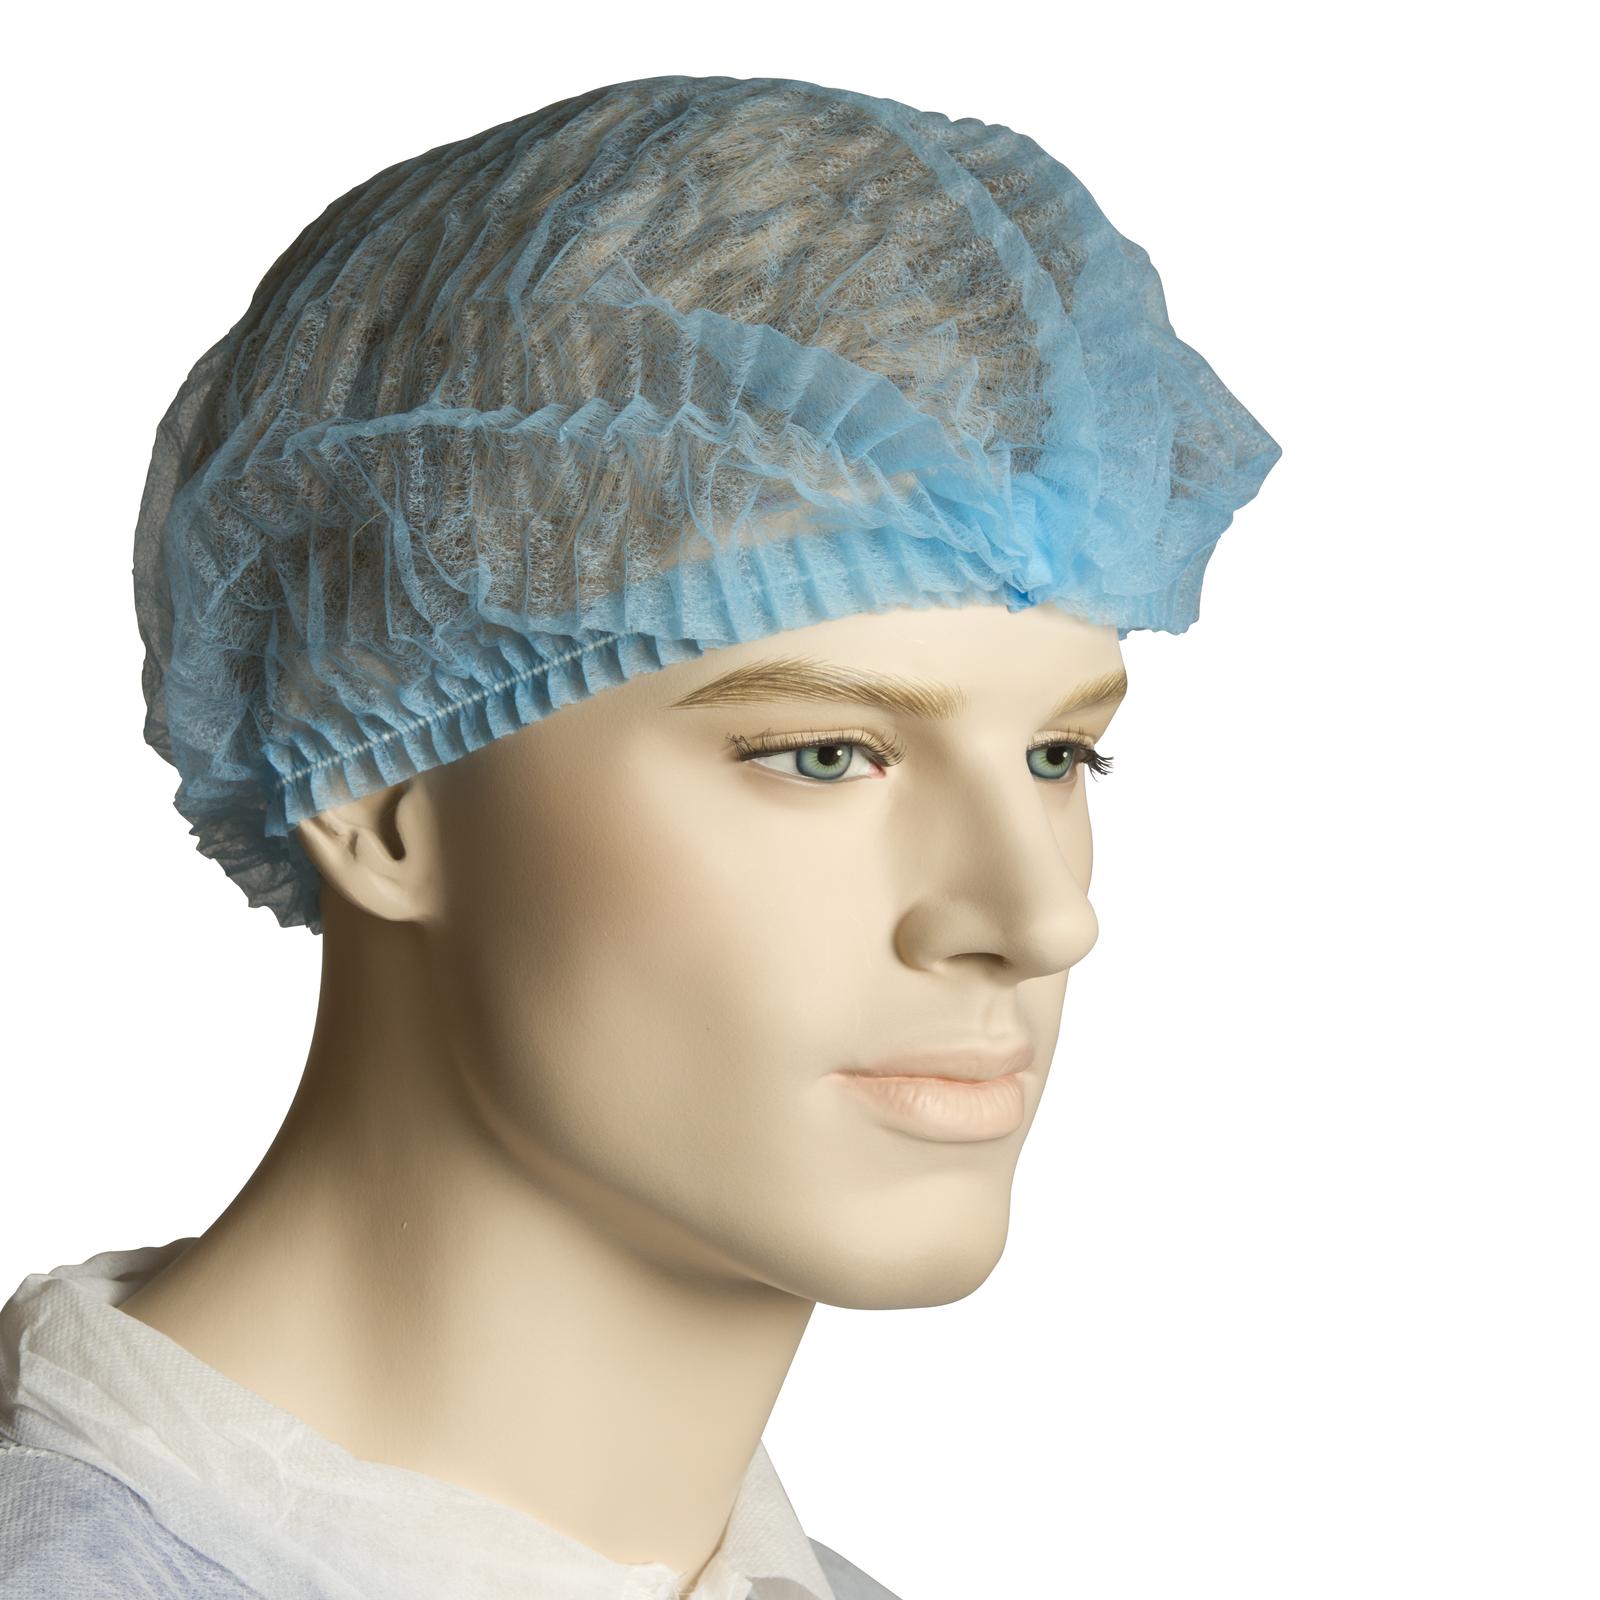 Wovas Disposable Nonwoven Bouffant Caps Hair Net Cape For Hospital, Salon,  Spa, Catering, Laboratories, Dust-free Workspace. Pack Of 100 Surgical Head  Cap Price in India - Buy Wovas Disposable Nonwoven Bouffant Caps